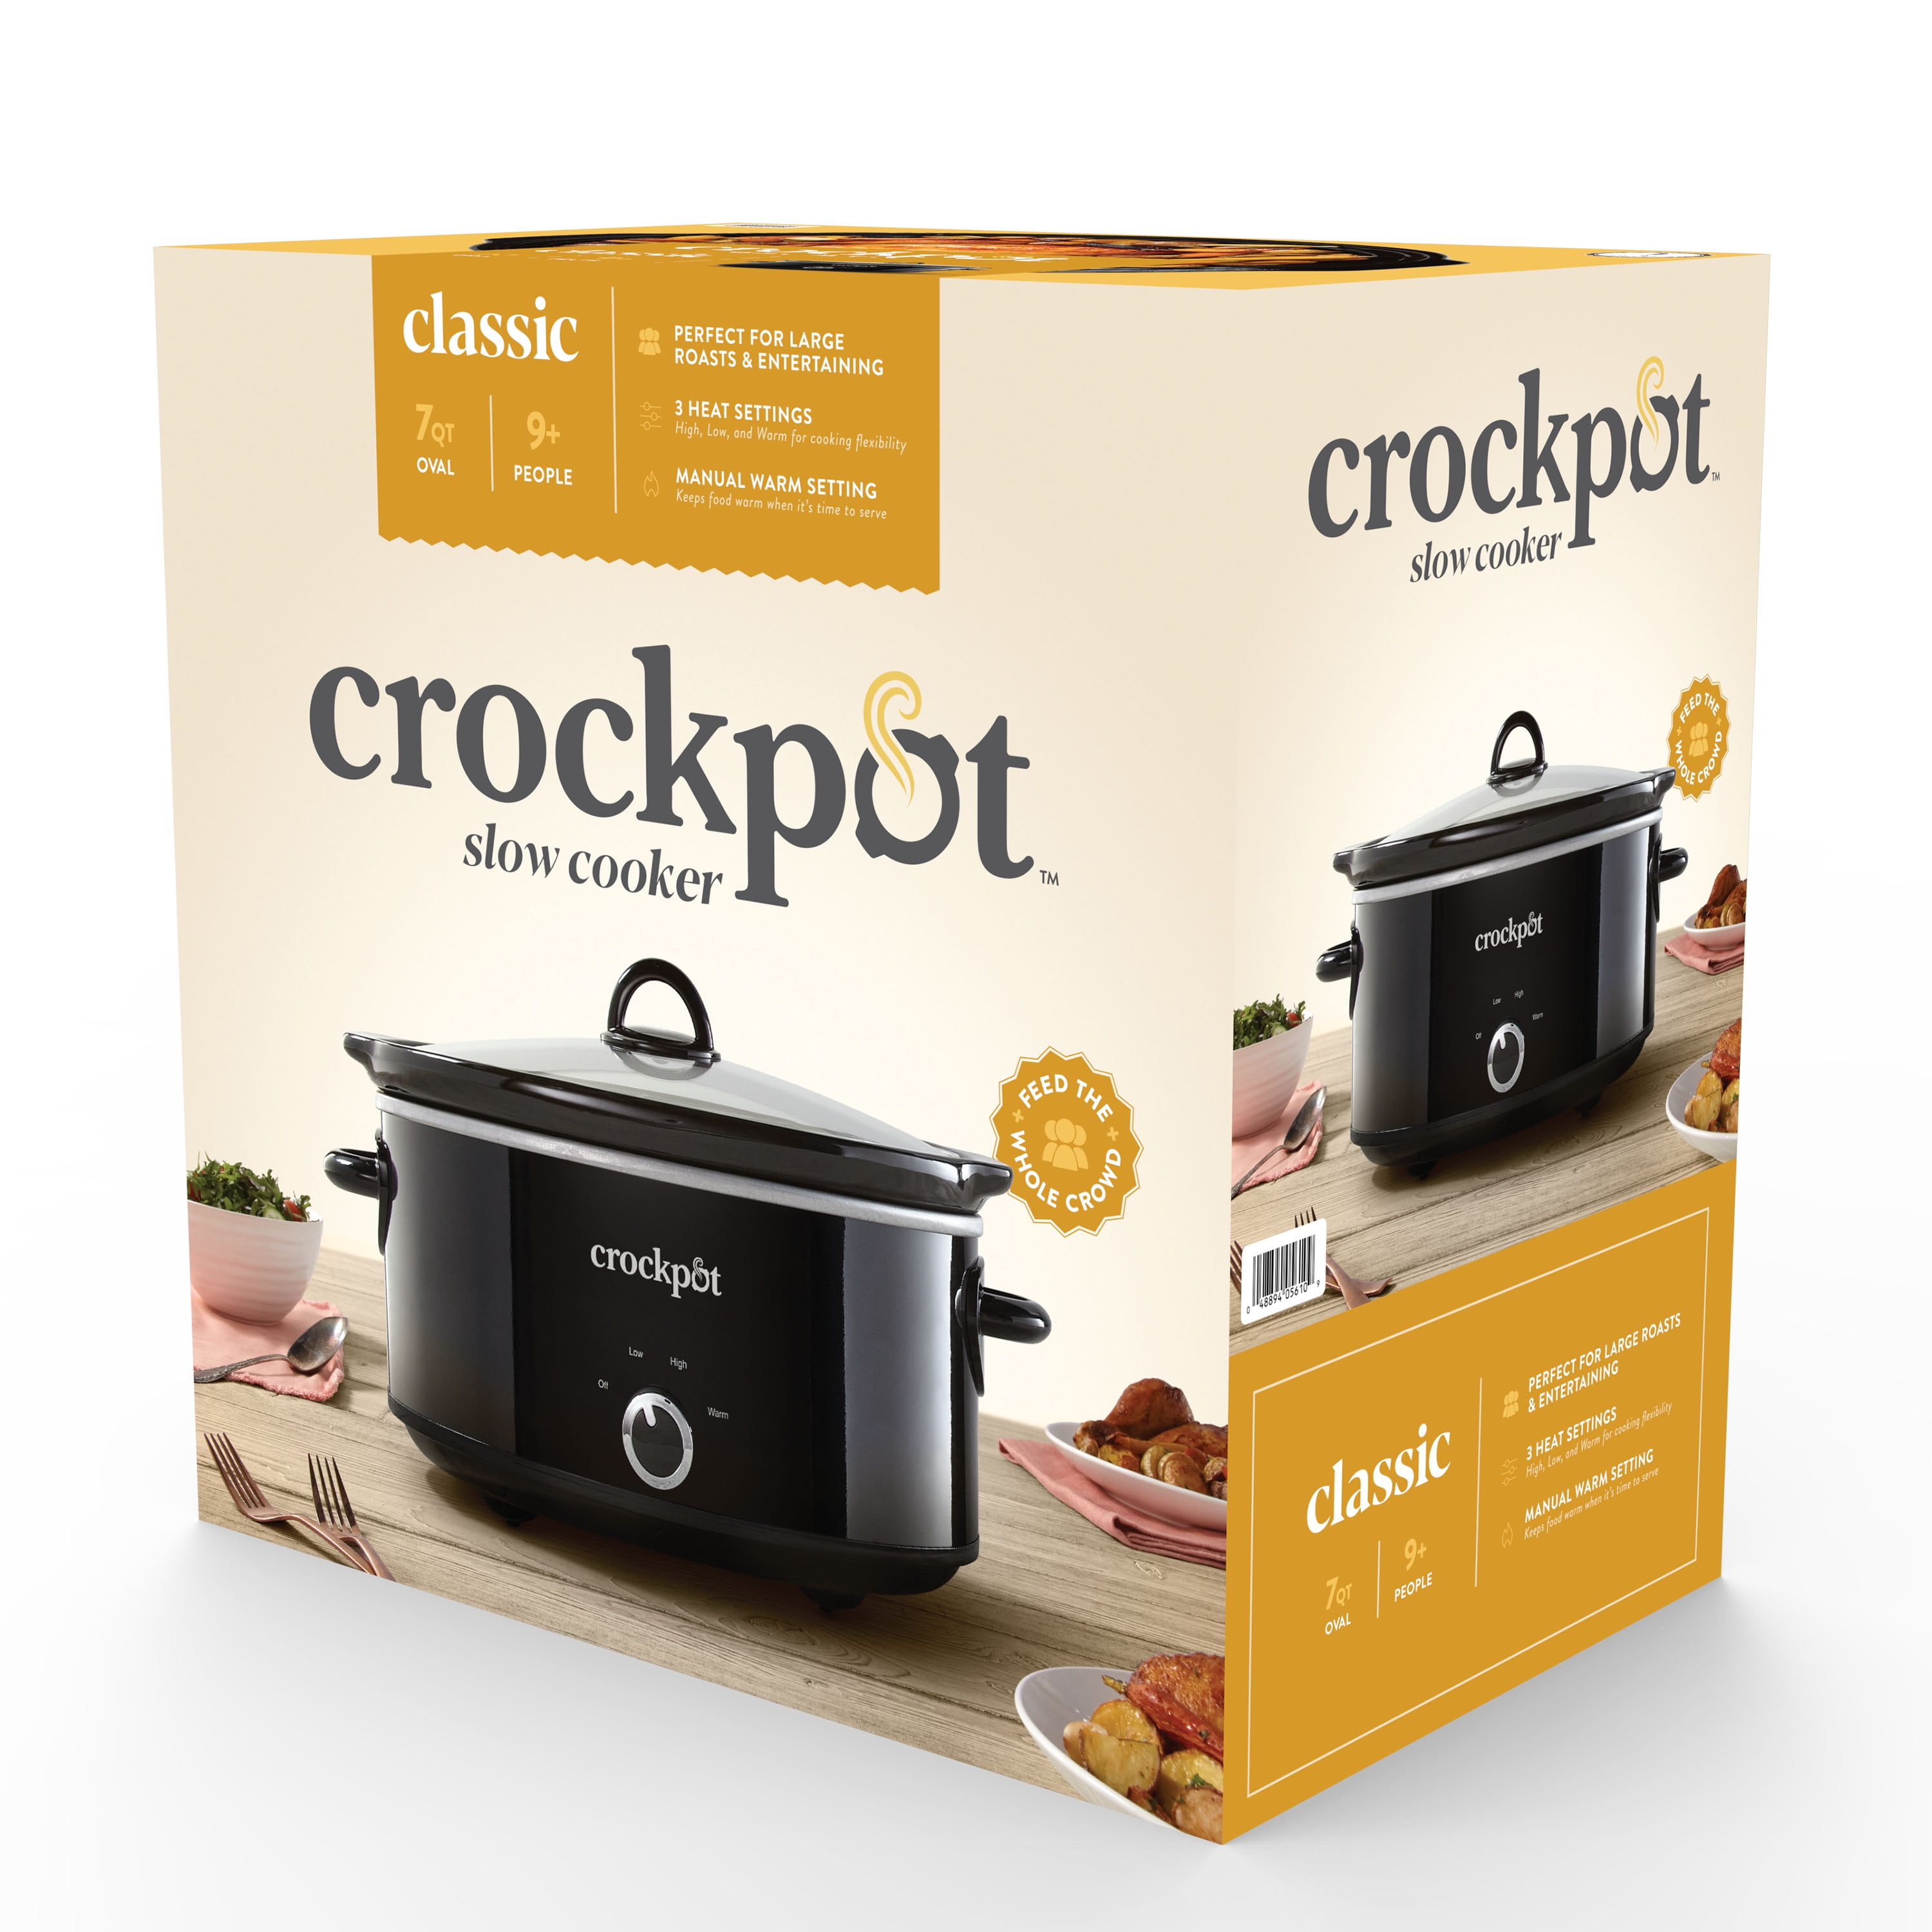 Crockpot™ 7-Quart Easy-to-Clean Cook & Carry™ Slow Cooker, Black Stainless  Steel